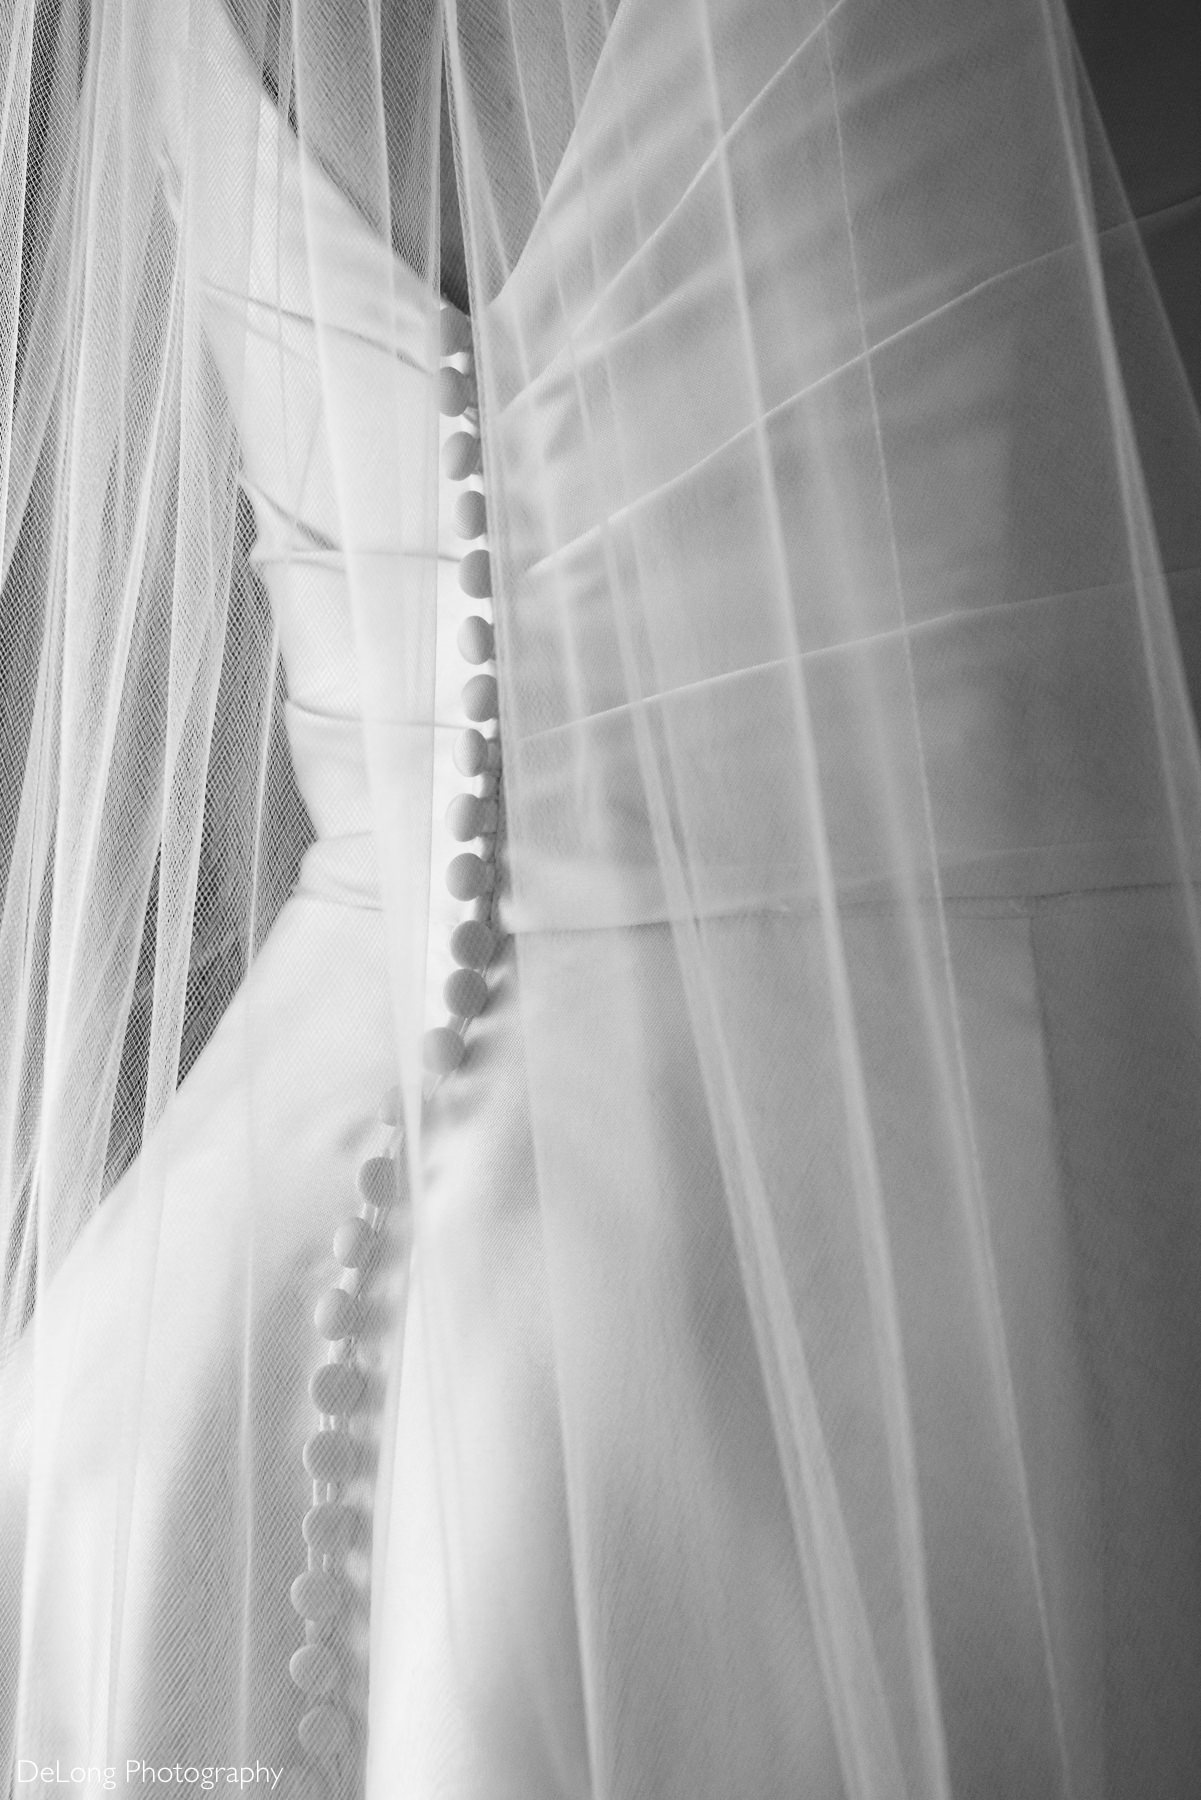 Detail photograph of buttons down the back of the bride's dress by Charlotte Wedding Photographers DeLong Photography